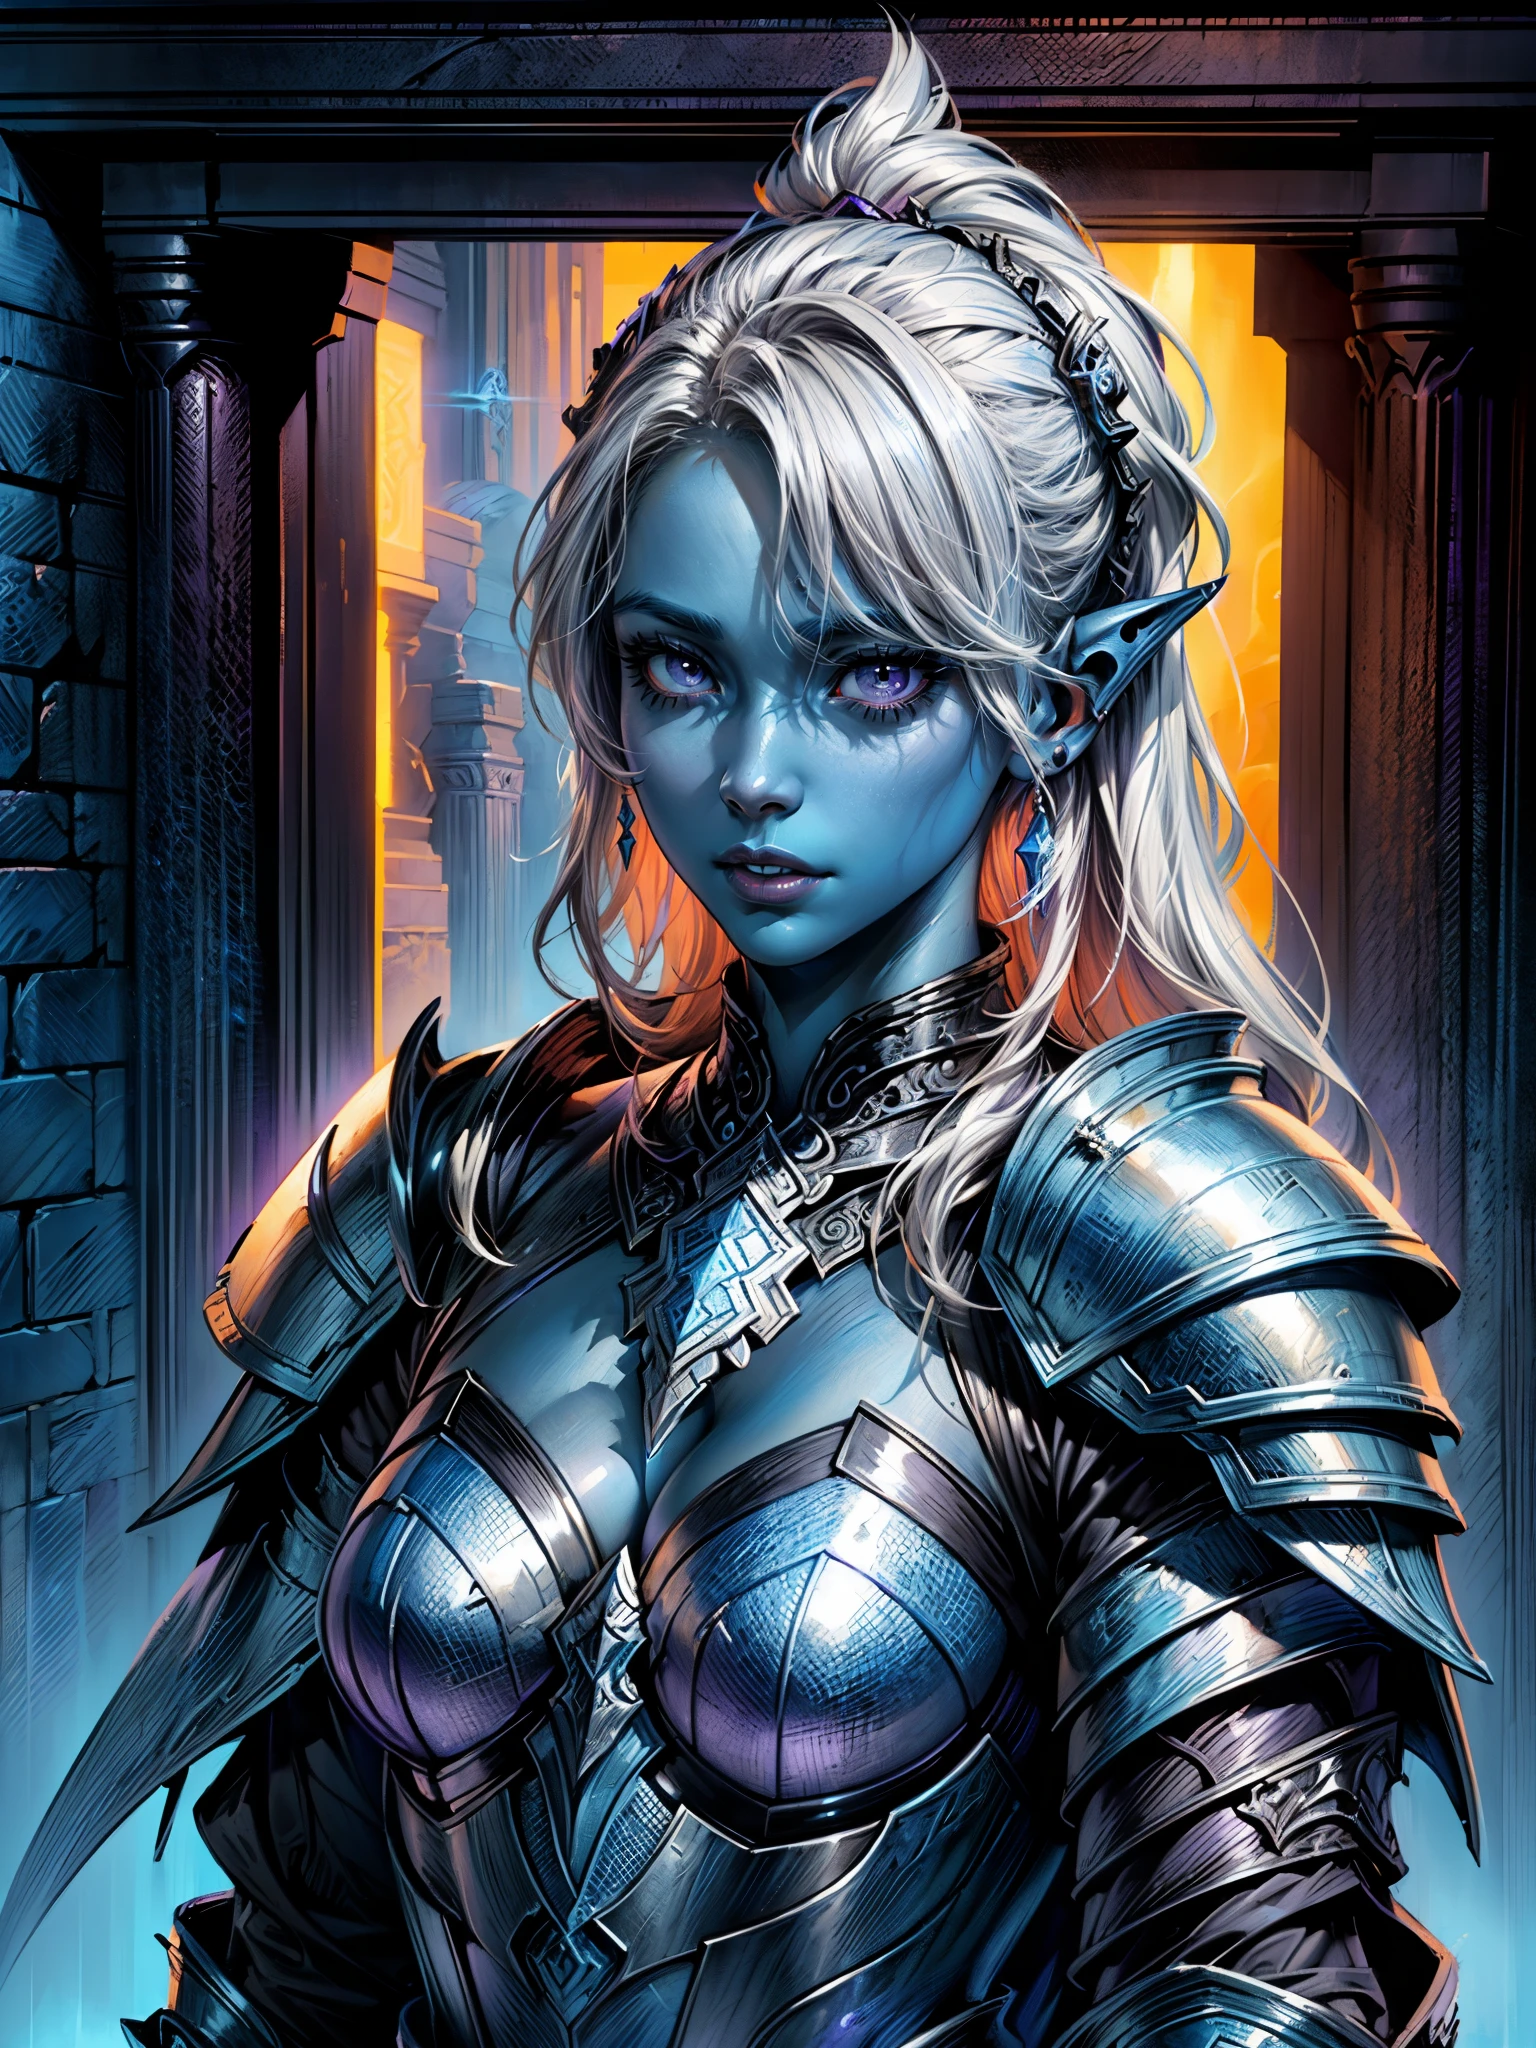 fAntAsy Art, dnd Art, RPG Art, Weitwinkelaufnahme, (mAsterpiece: 1.4) A (portrAit: 1.3) intense detAils, highly detAiled, photoreAlistic, best quAlity, highres, portrAit A femAle (fAntAsy Art, MAsterpiece, best quAlity: 1.3) ((Blau skin: 1.5)), intense detAils fAciAl detAils, exquisite beAuty, (fAntAsy Art, MAsterpiece, best quAlity) Kleriker, (Blau: 1.3) skinned femAle, (Weiß hAir: 1.4), long hAir, (hAir hides eArs: 1.5), (lila Augen: 1.3), Action shot fAntAsy Art, MAsterpiece, best quAlity) Armed A fiery sword red fire, weAring heAvy (Weiß: 1.3) hAlf plAte mAil Armor, weAring high heeled lAced boots, weAring An(orAnge :1.3) cloAk, weAring glowing holy symbol GlowingRunes_Gelb, within fAntAsy temple bAckground, Reflexionslicht, high detAils, best quAlity, 16k, [ultrA detAiled], mAsterpiece, best quAlity, (extremely detAiled), Nahaufnahme, ultrA Weitwinkelaufnahme, photoreAlistic, Roh, fAntAsy Art, dnd Art, fAntAsy Art, reAlistic Art,((best quAlity)), ((mAsterpiece)), (detAiled), perfect fAce,